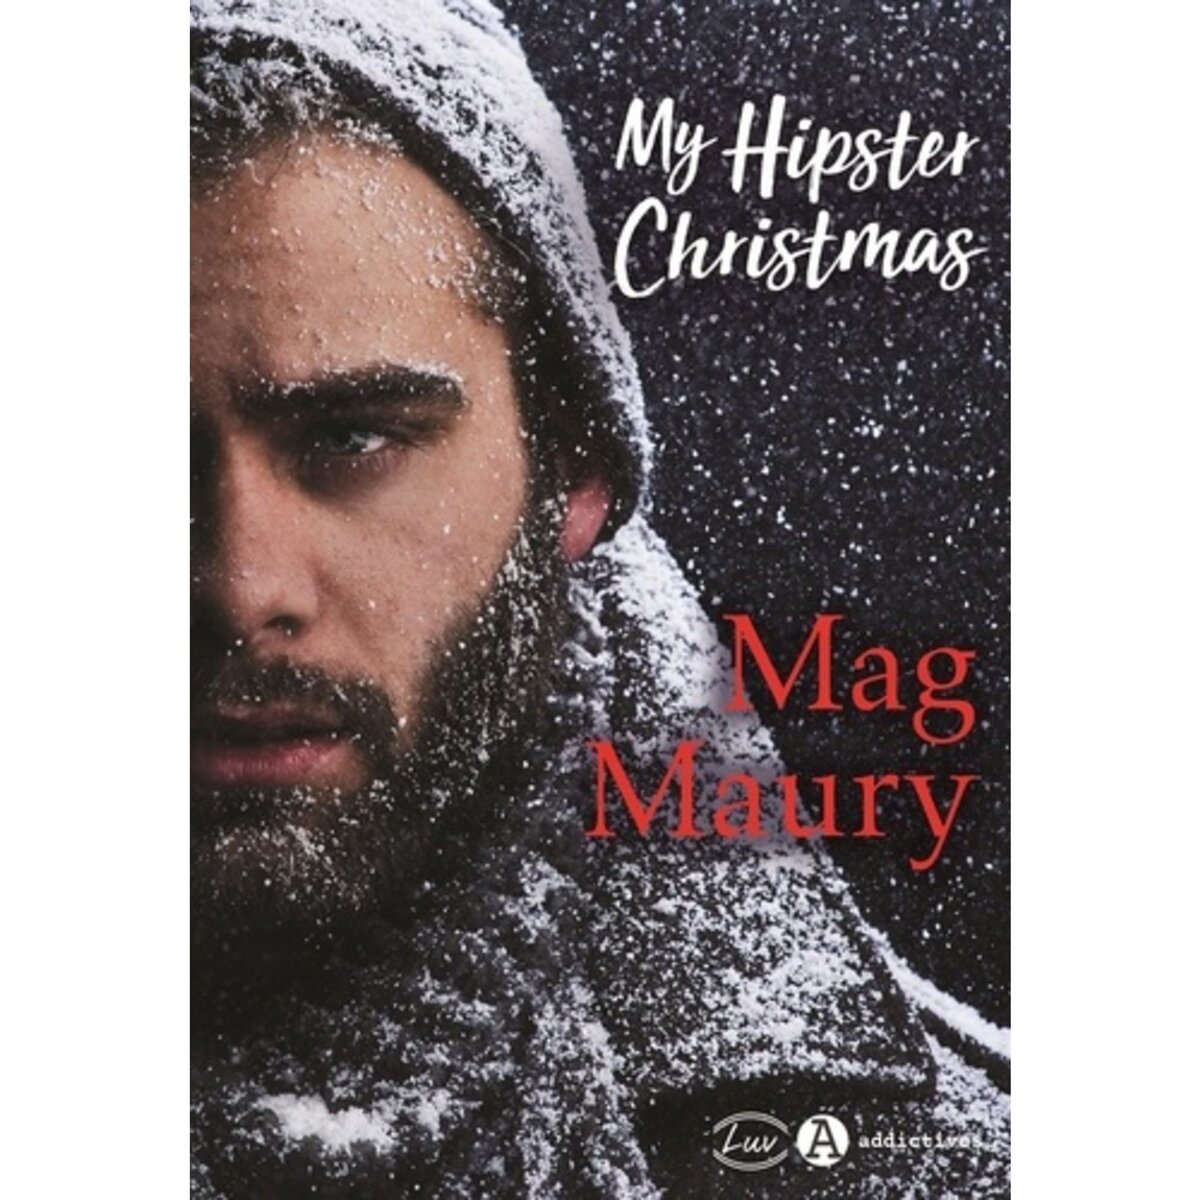  MY HIPSTER CHRISTMAS, Maury Mag